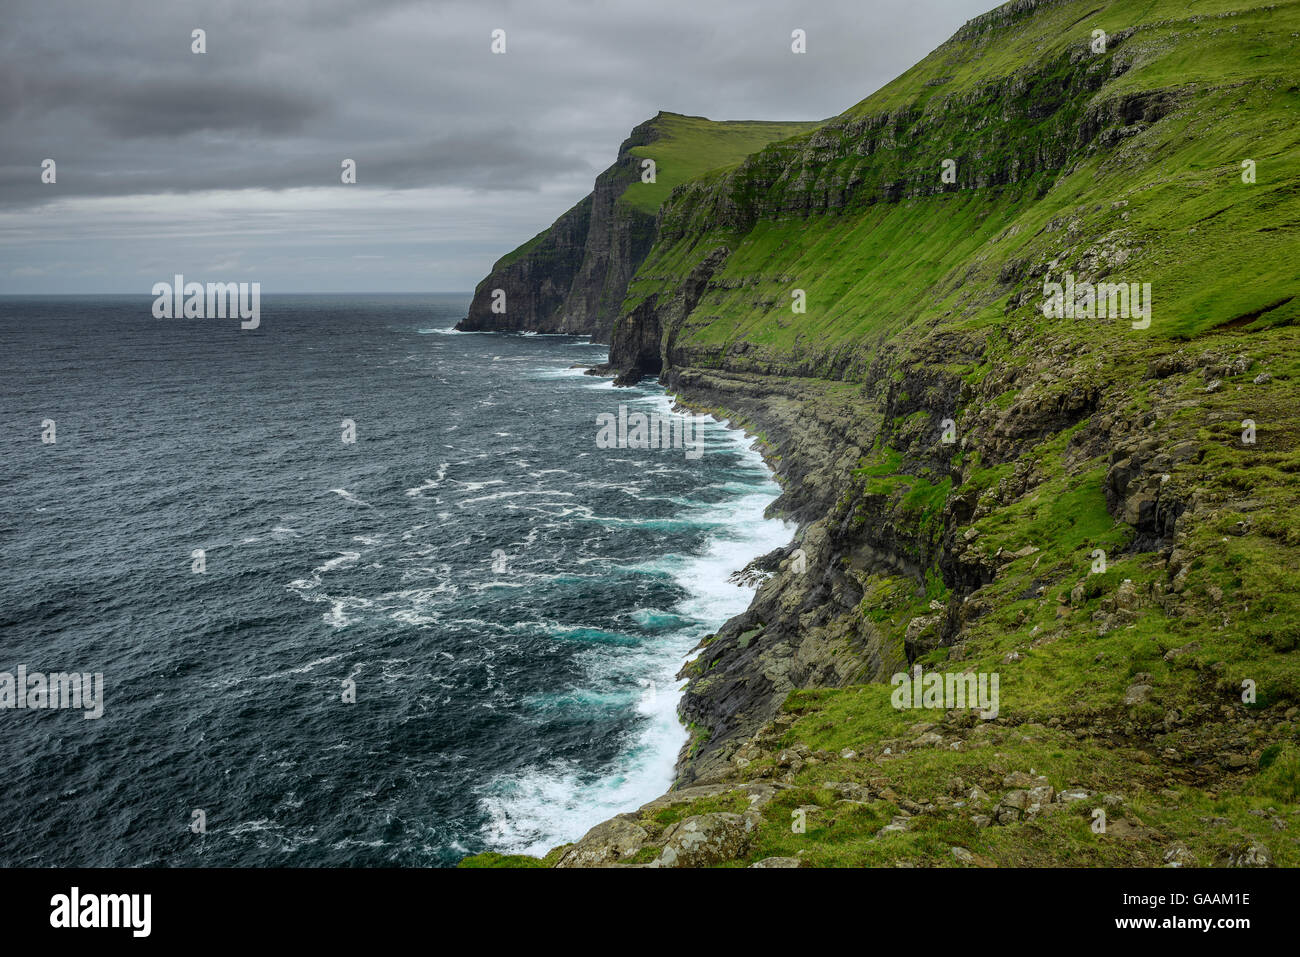 Giant sea cliffs shortly after storm on Faroe Islands Stock Photo